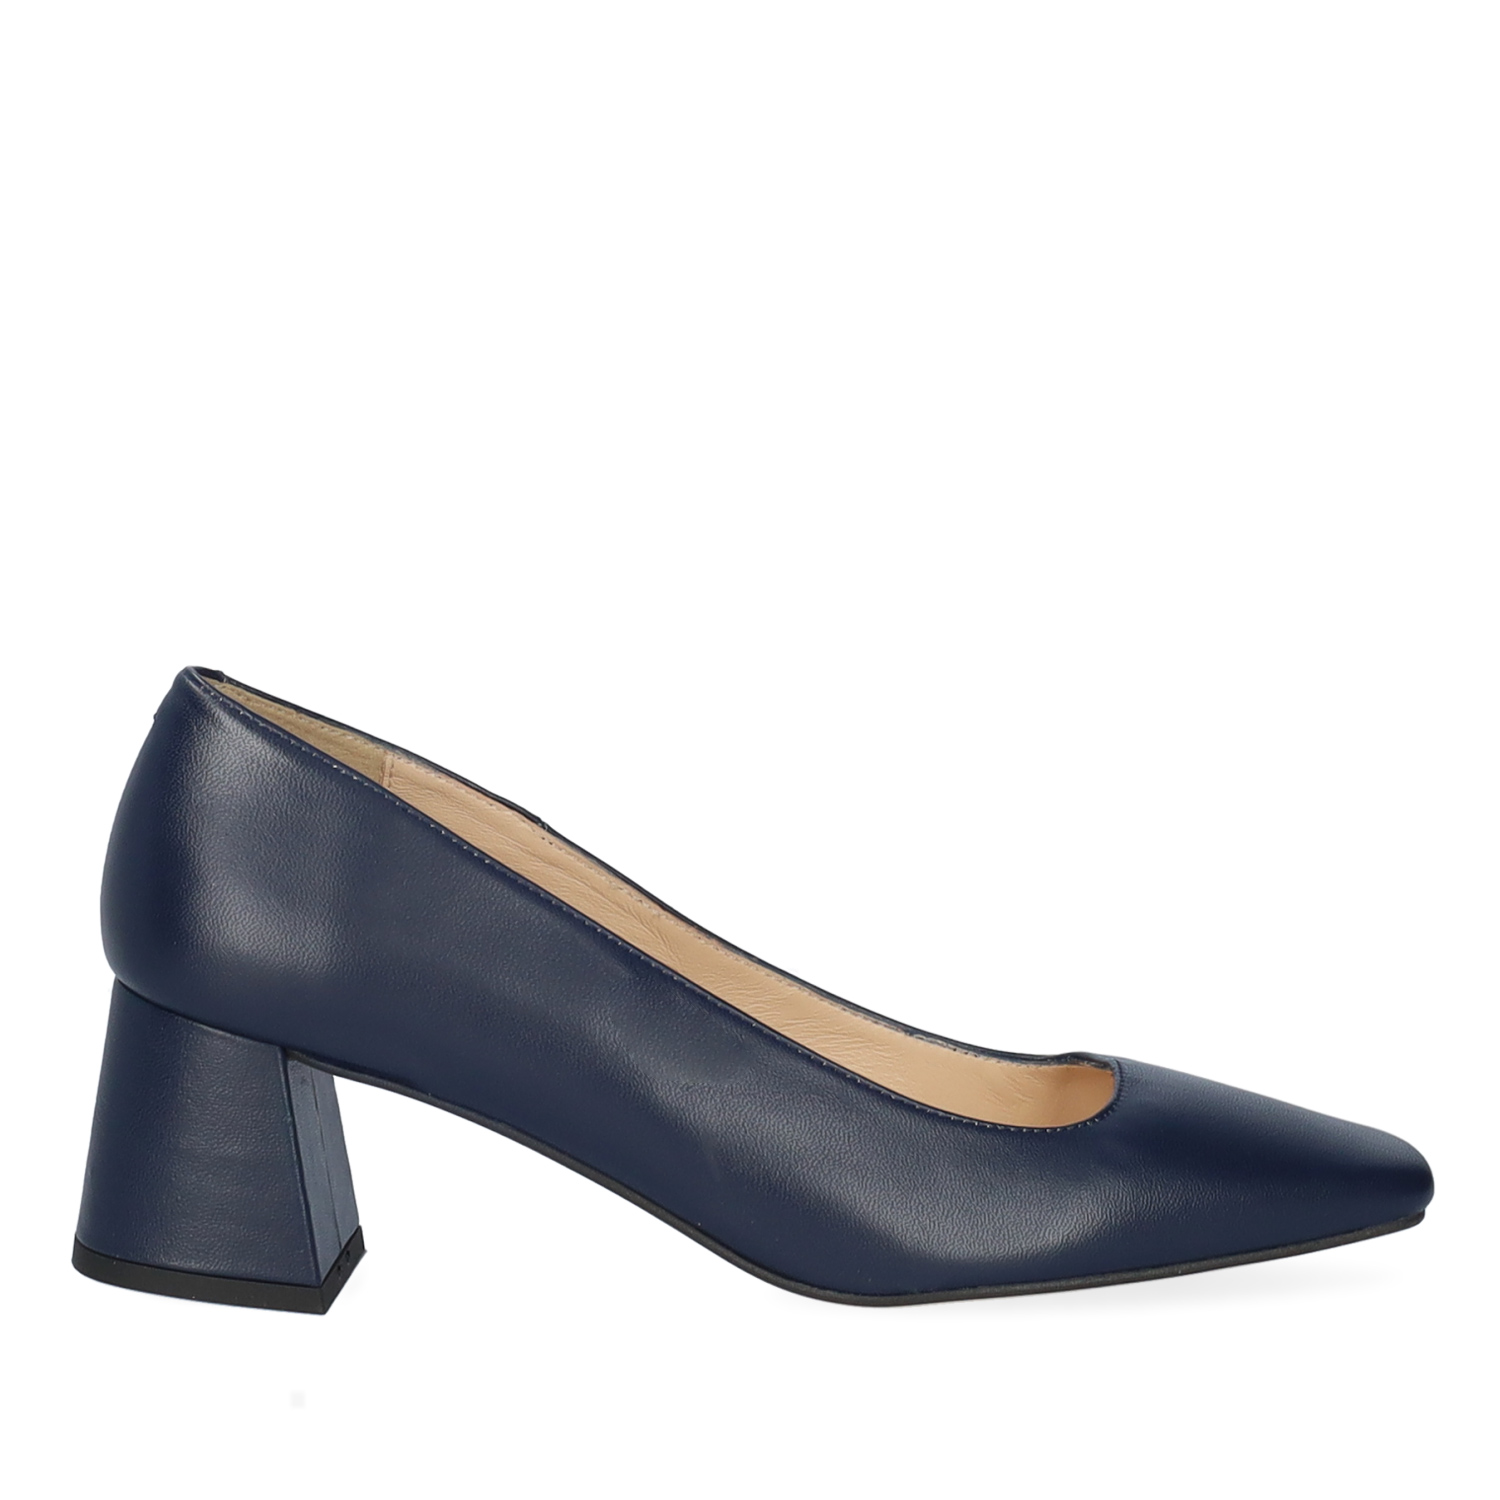 Heeled shoe in navy leather 